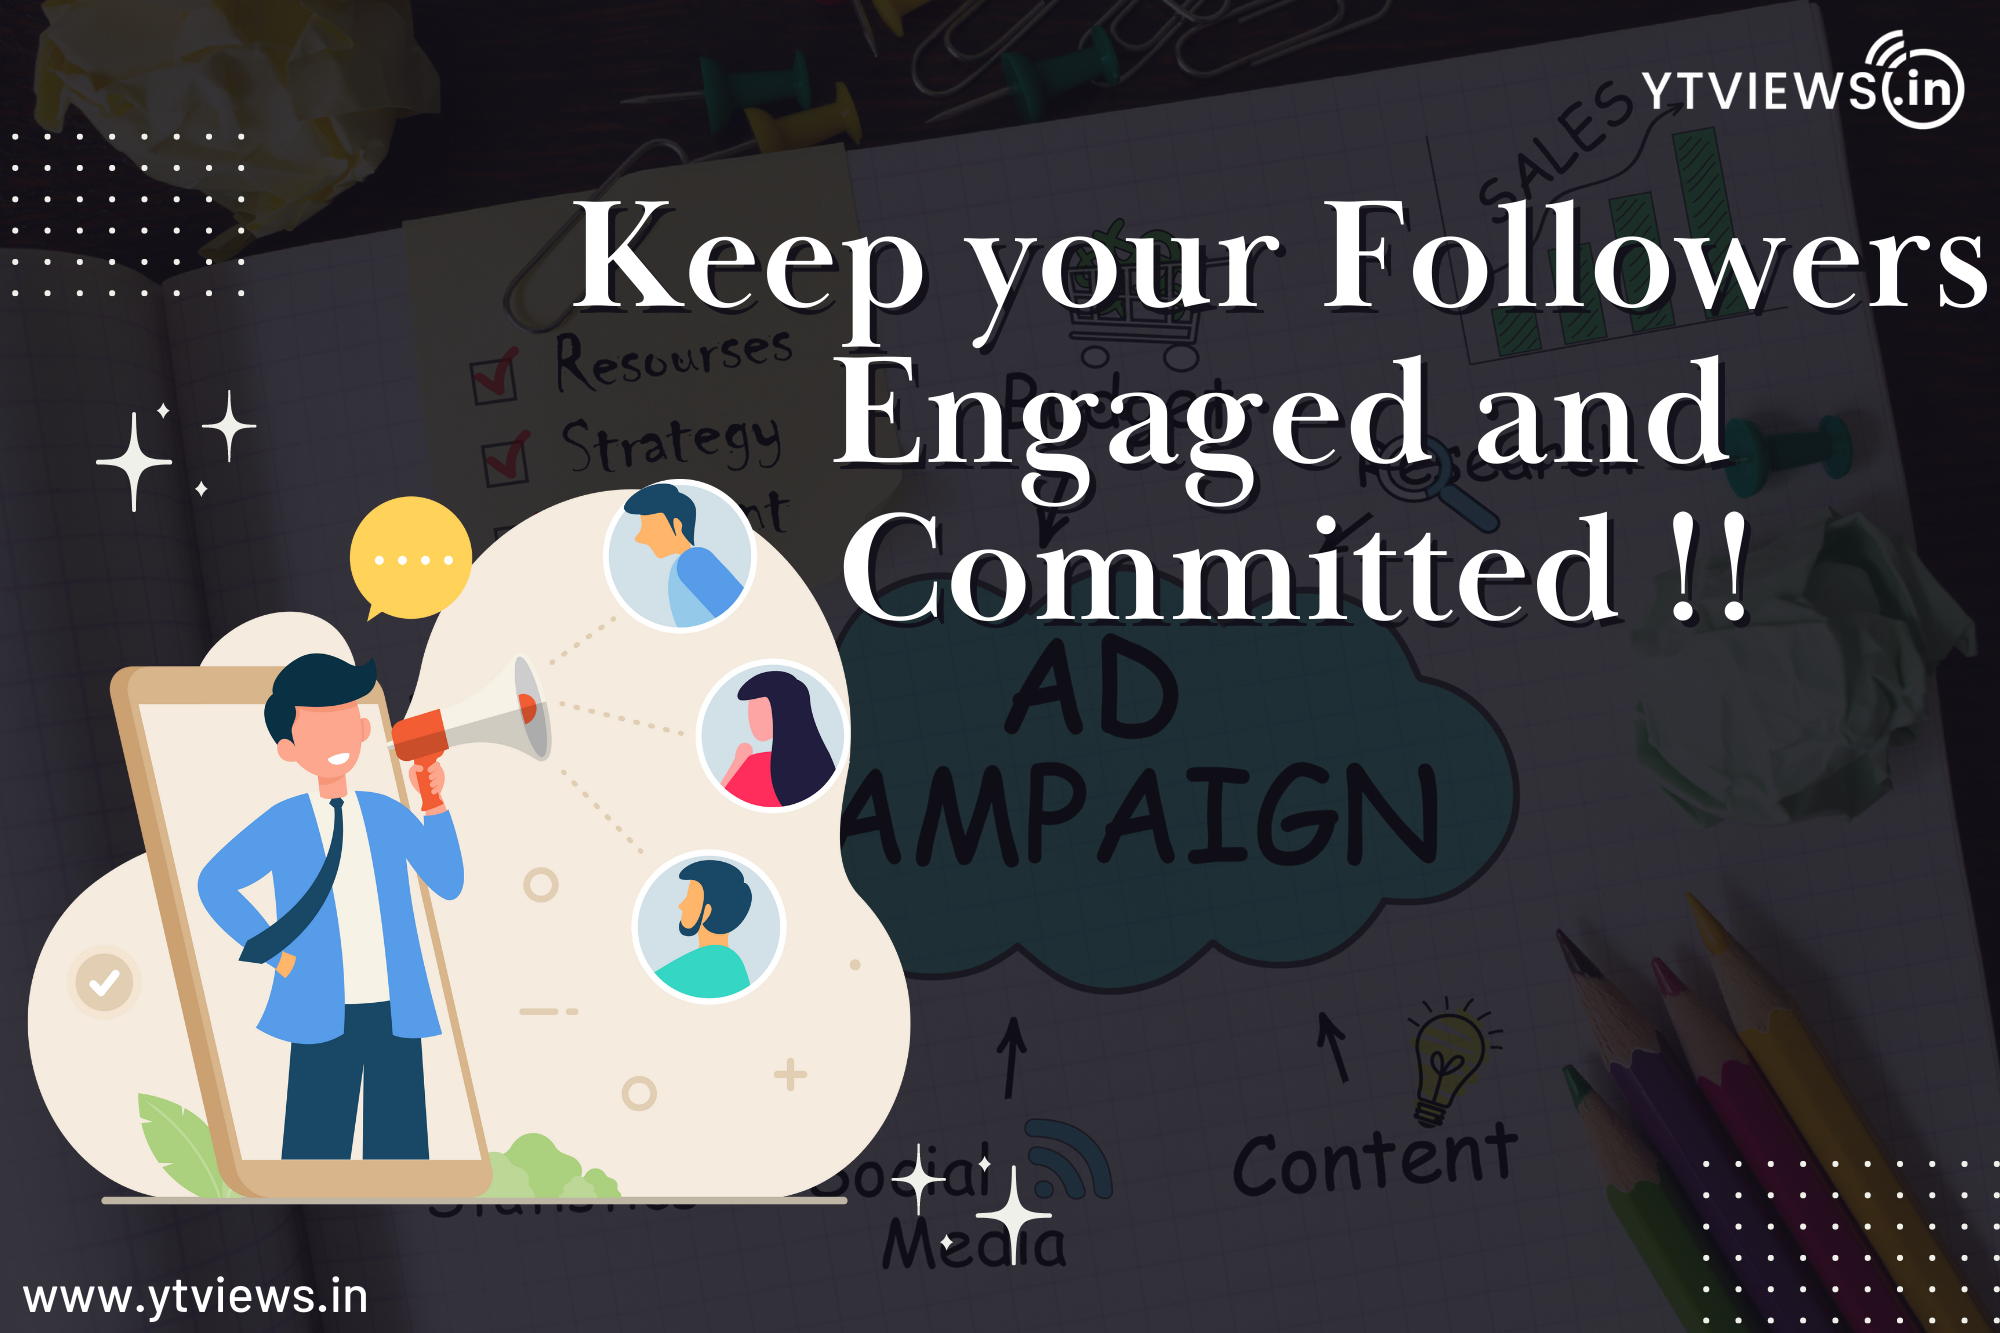 Crucial tips for keeping your followers engaged and committed to your brand in your marketing campaign